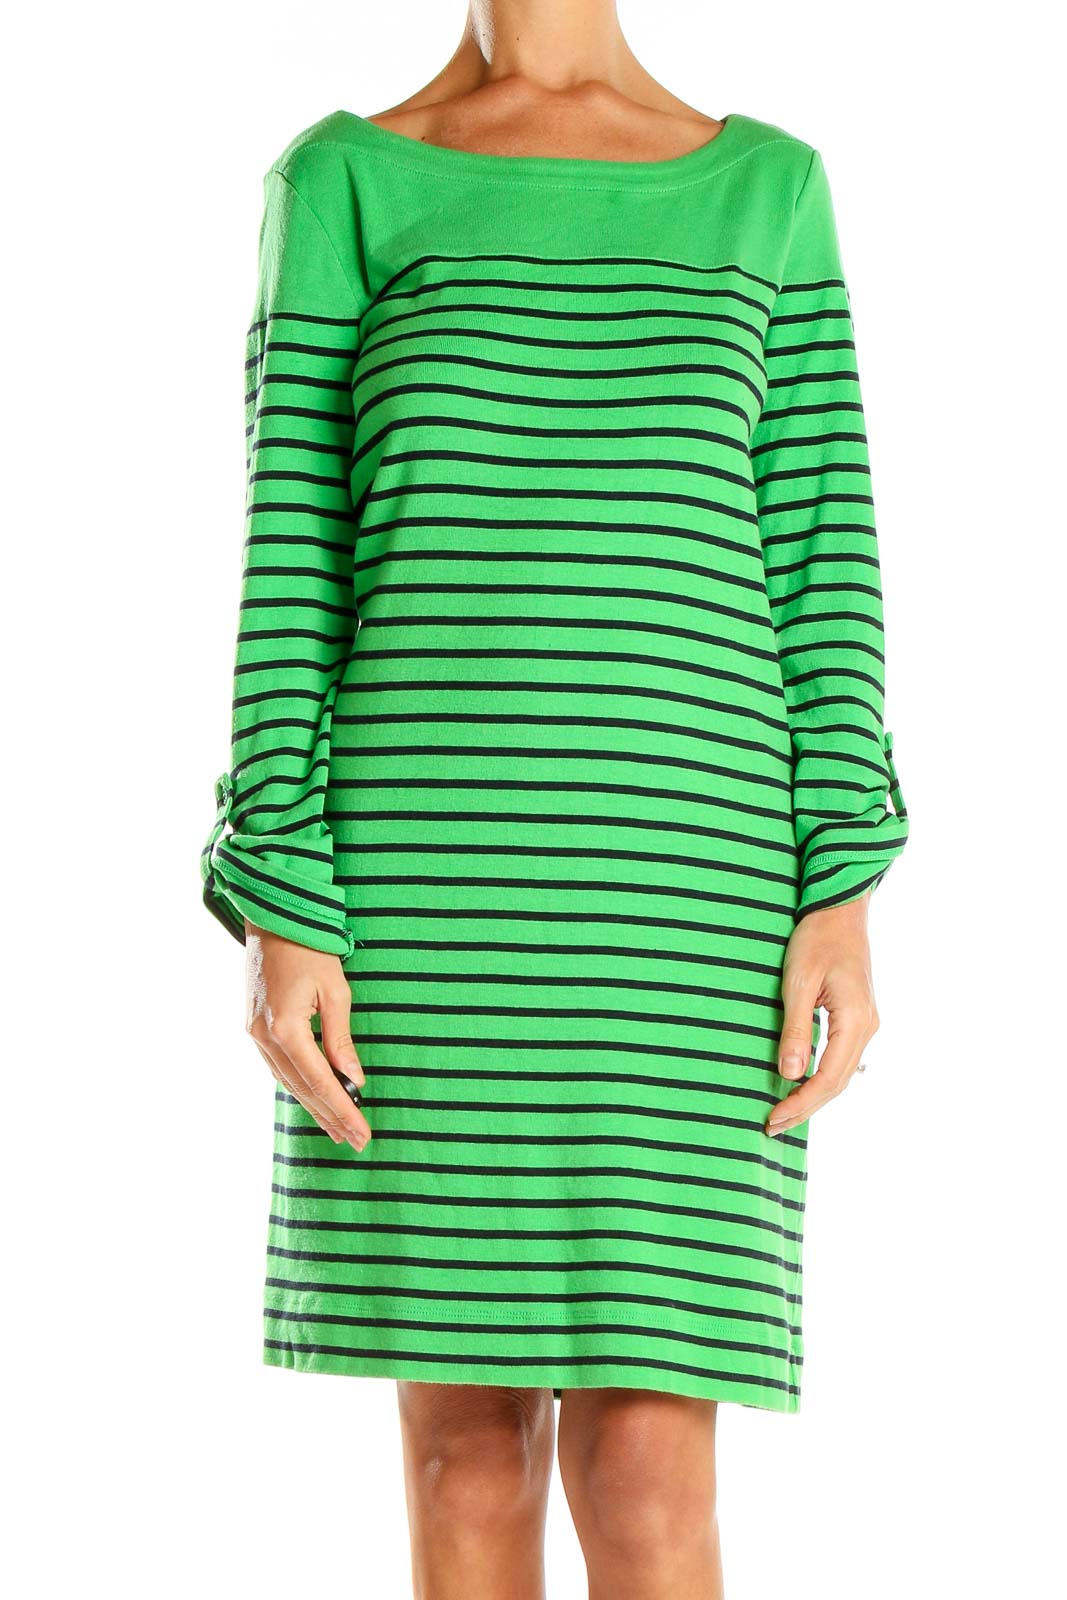 Green Striped Shift Dress Front